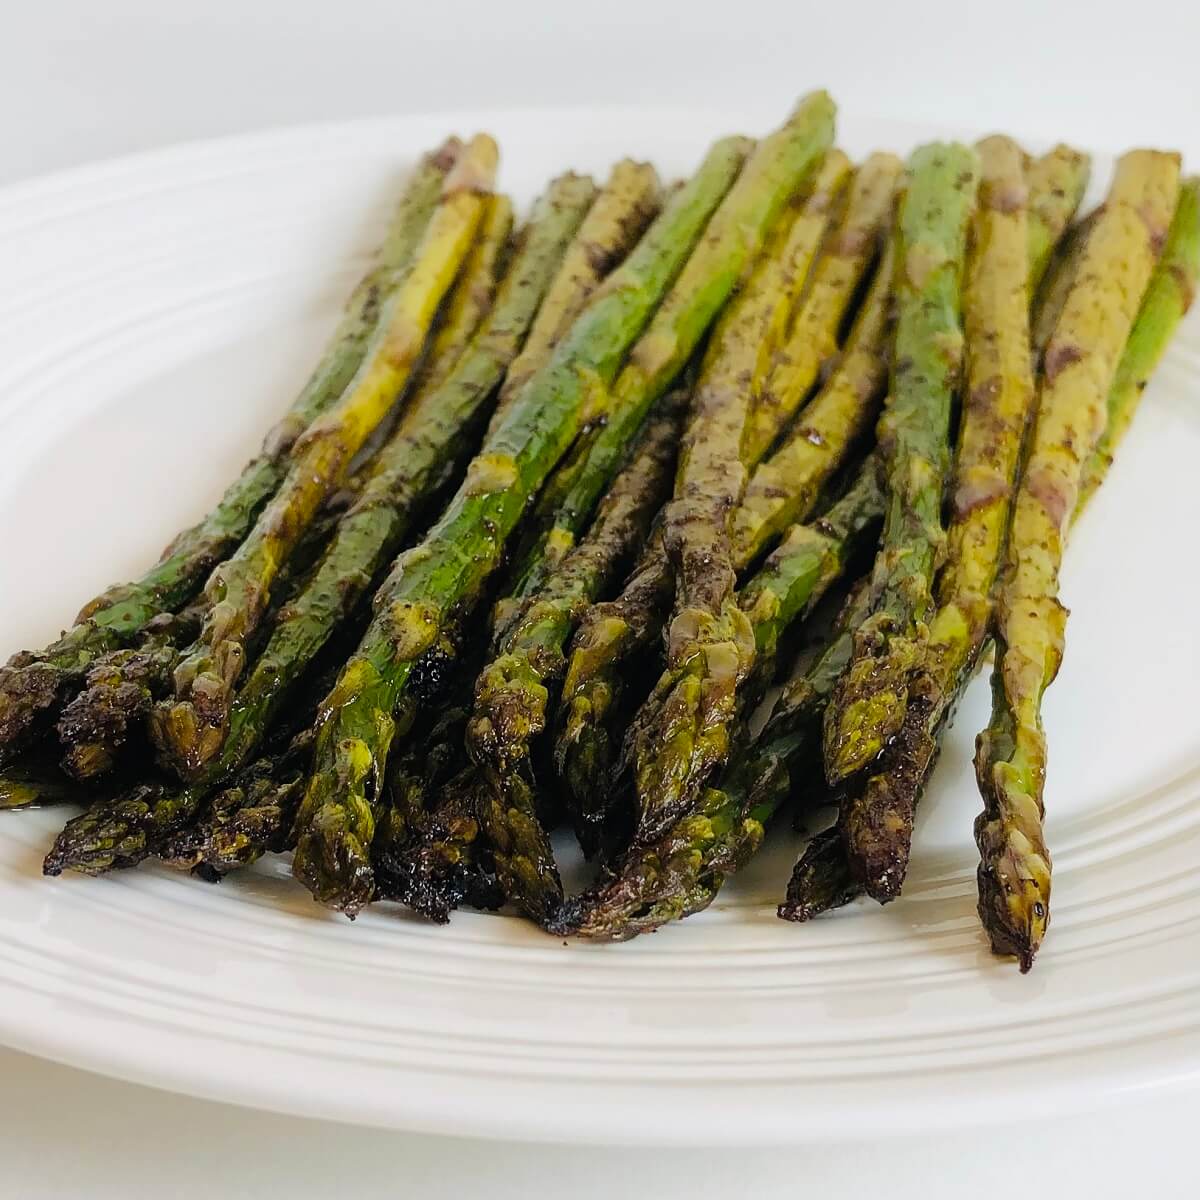 Balsamic roasted asparagus spears on a white plate.